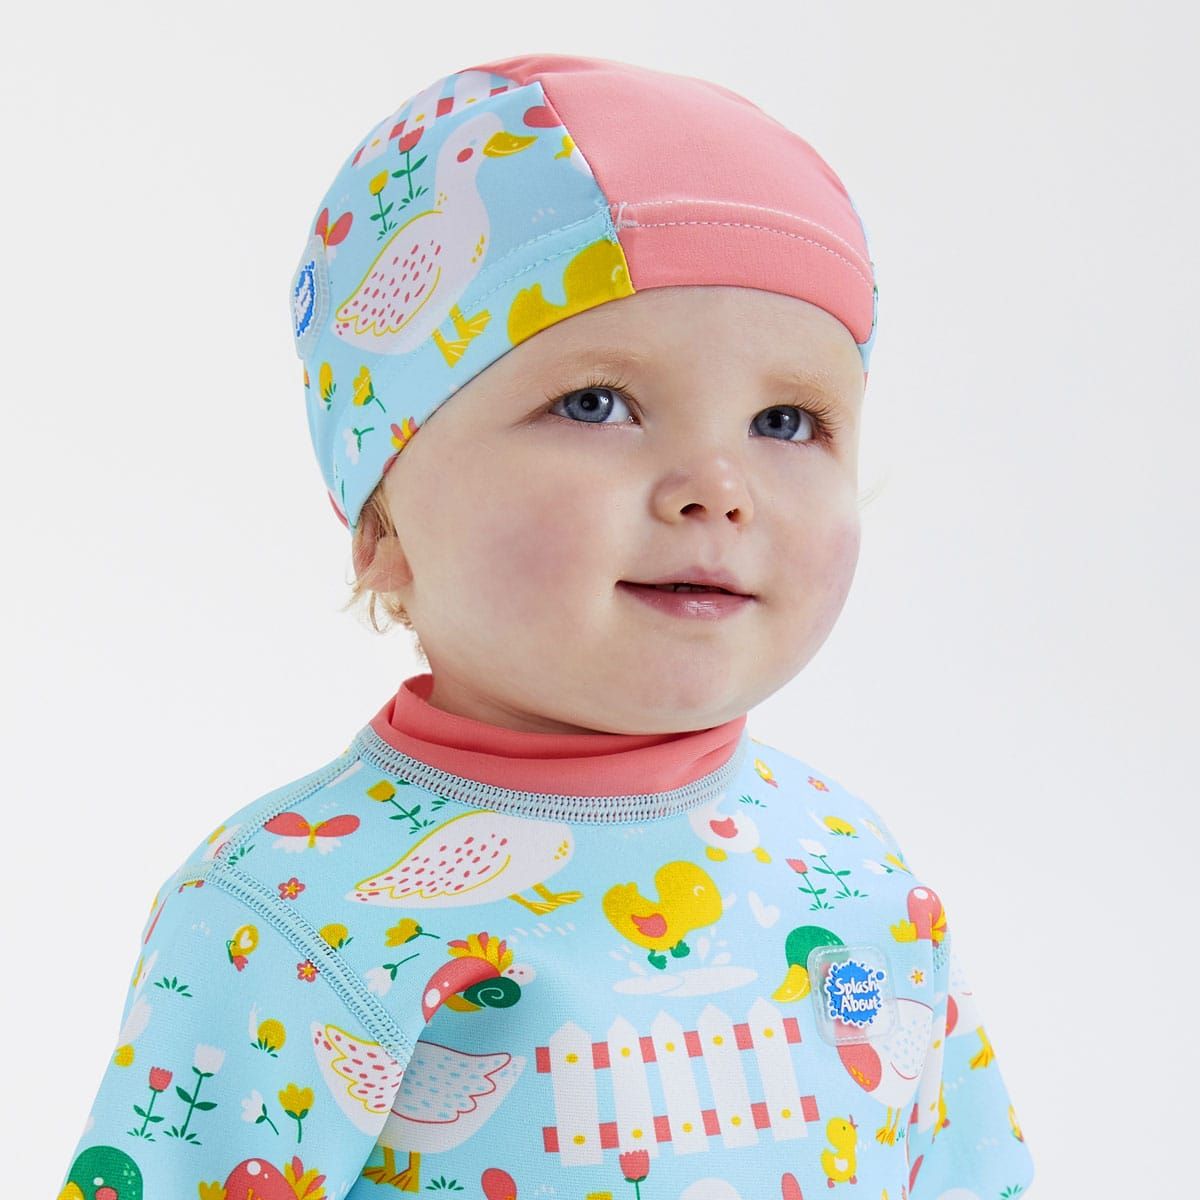 Toddler wearing  swim hat in light blue with pink trims and little ducks themed print.